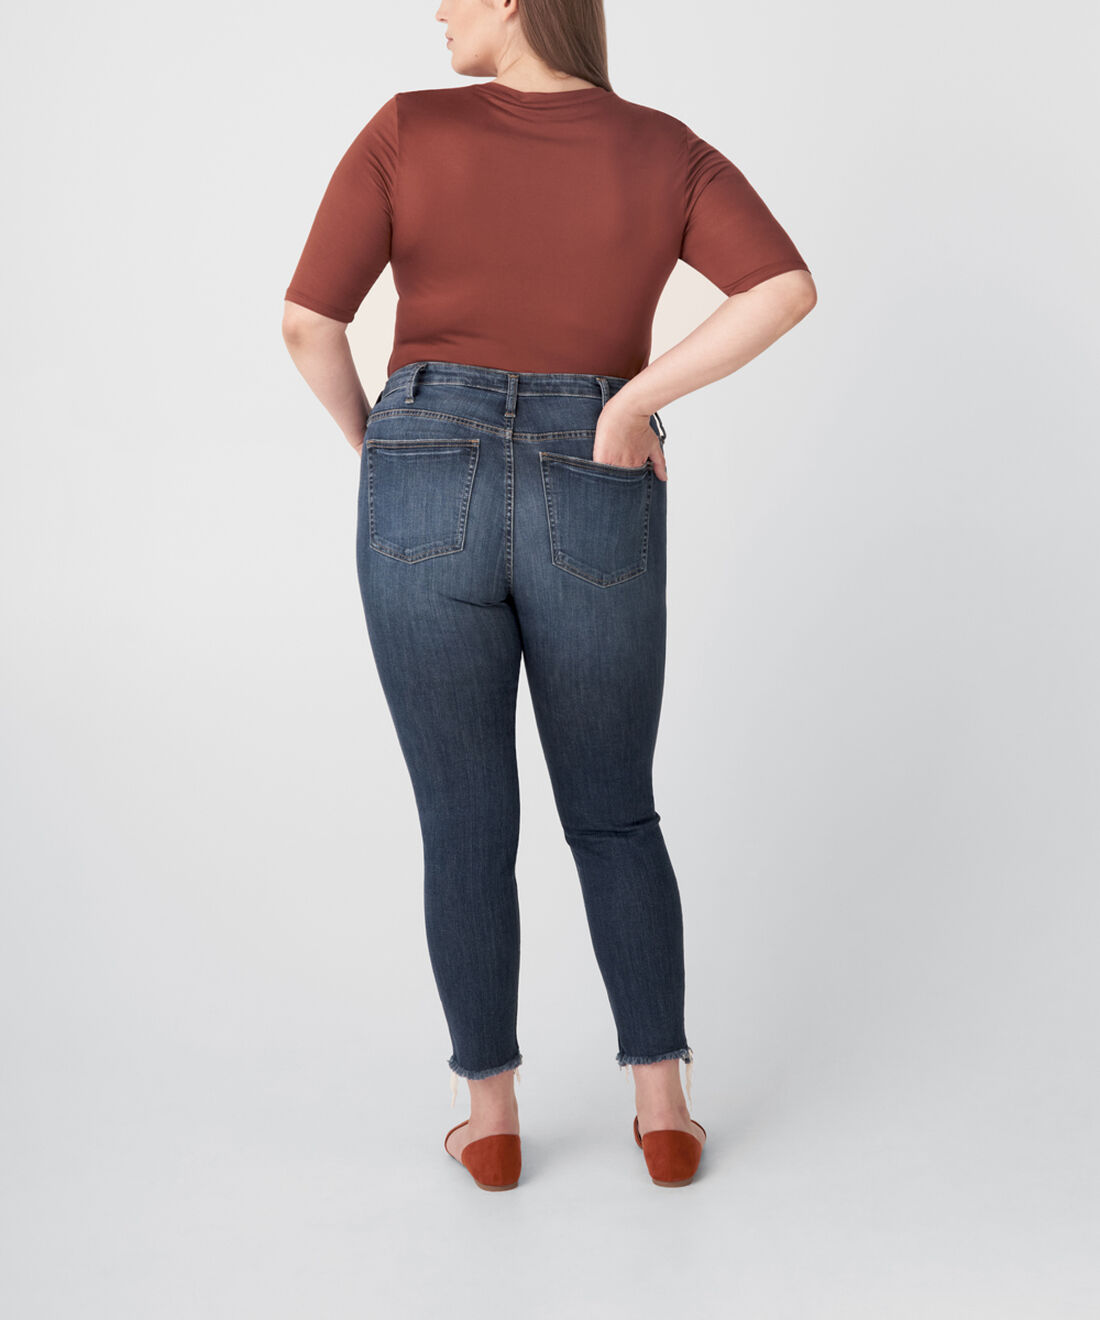 Most Wanted Mid Rise Skinny Jeans Plus Size Side